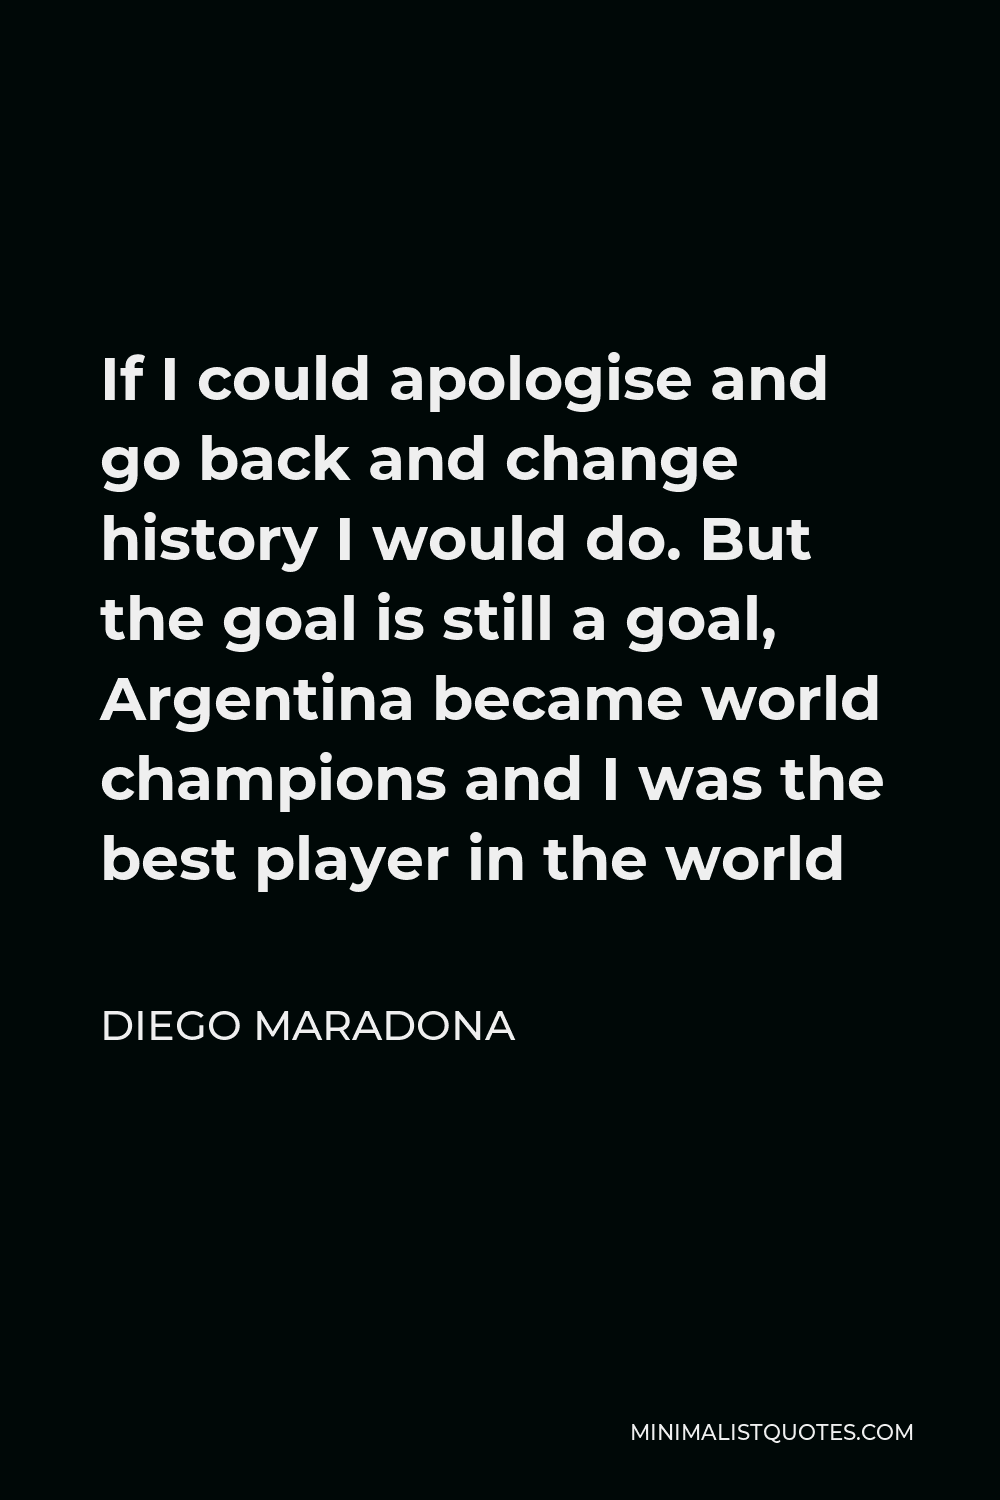 Diego Maradona Quote - If I could apologise and go back and change history I would do. But the goal is still a goal, Argentina became world champions and I was the best player in the world